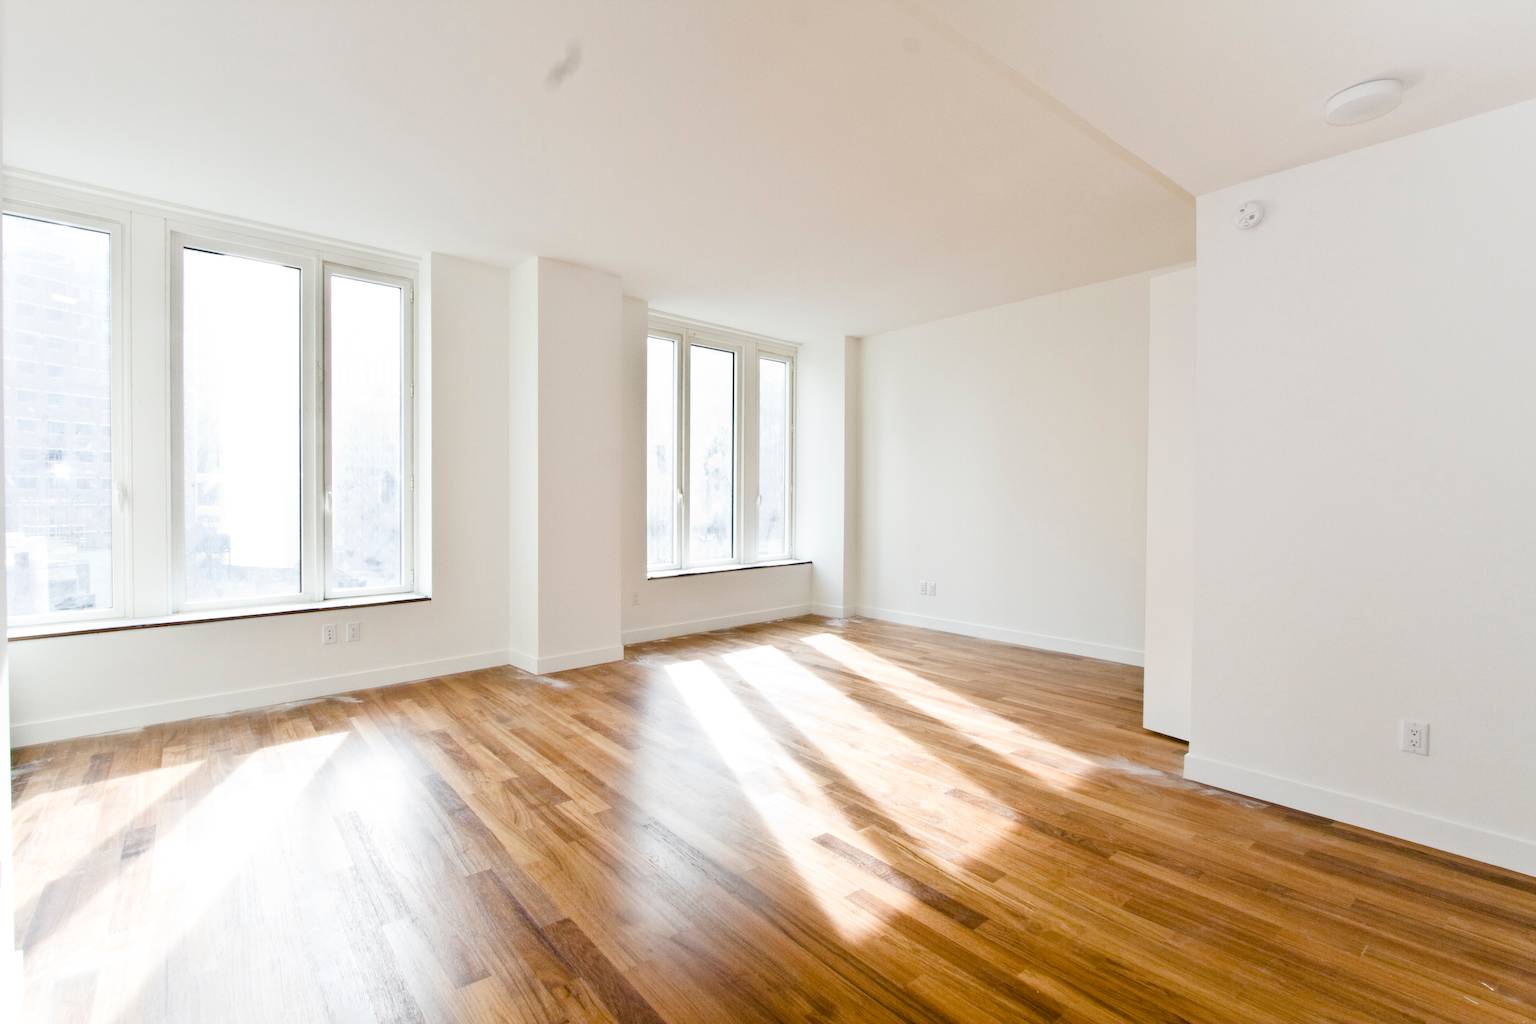 Alcove Studio Apartment Rental In The Heart Of The Financial District! Manhattan Rental